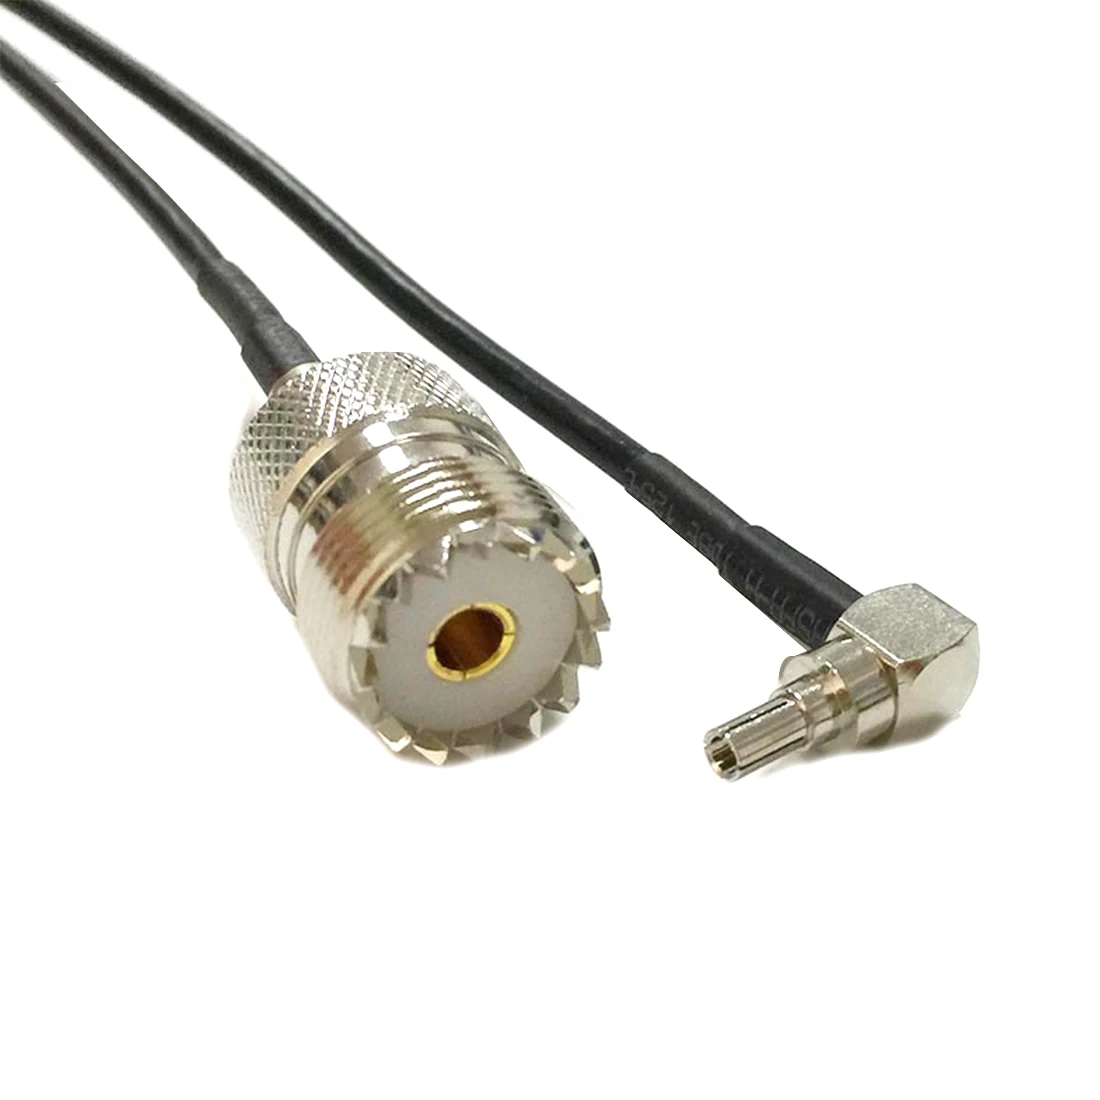 

3G Antenna Cable CRC9 Male Switch UHF Male / Female Pigtail Adapter RG174 10cm/15cm/20cm/30cm/50cm Wholesale